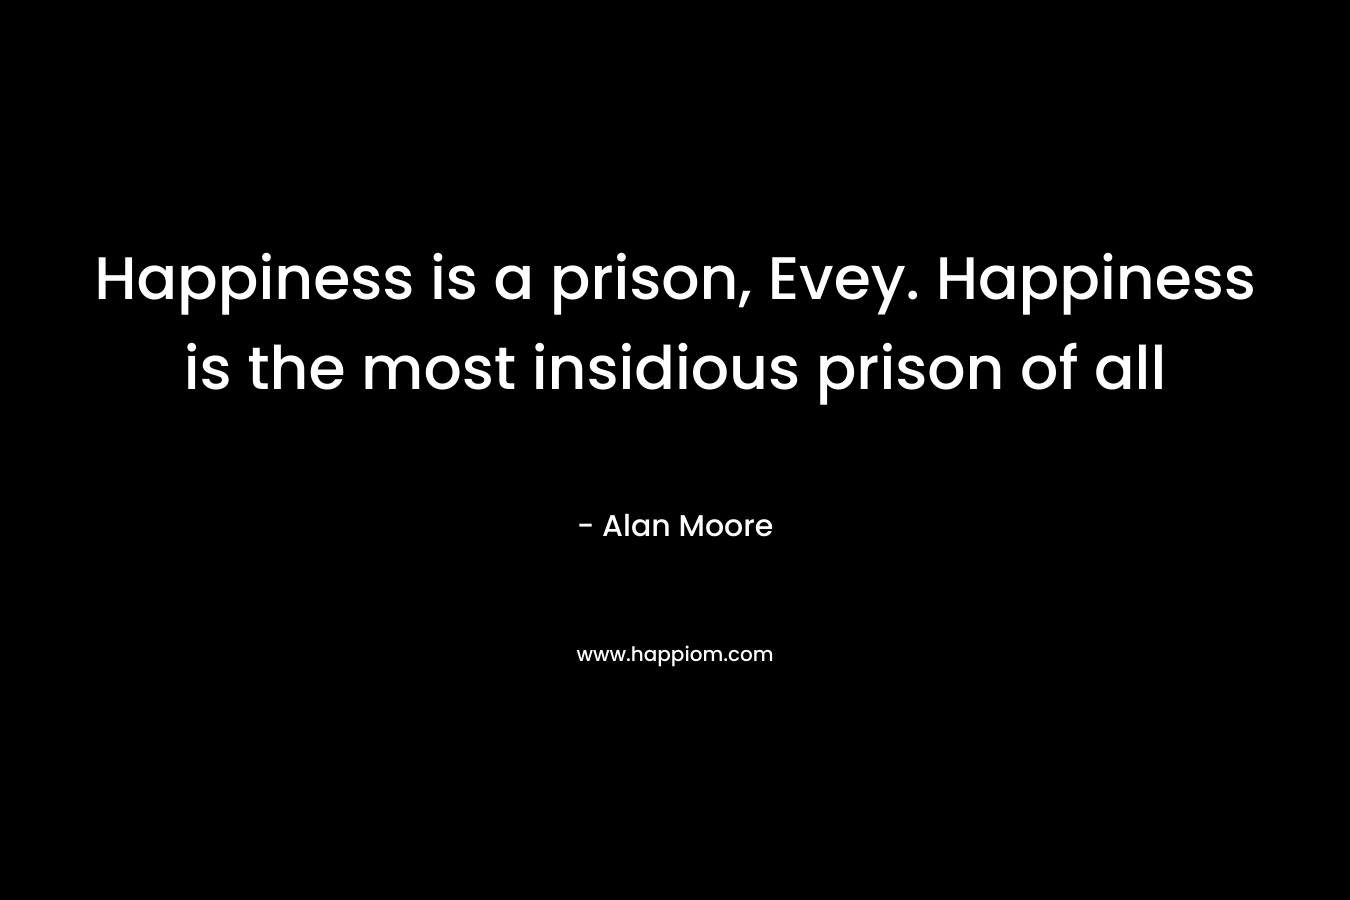 Happiness is a prison, Evey. Happiness is the most insidious prison of all